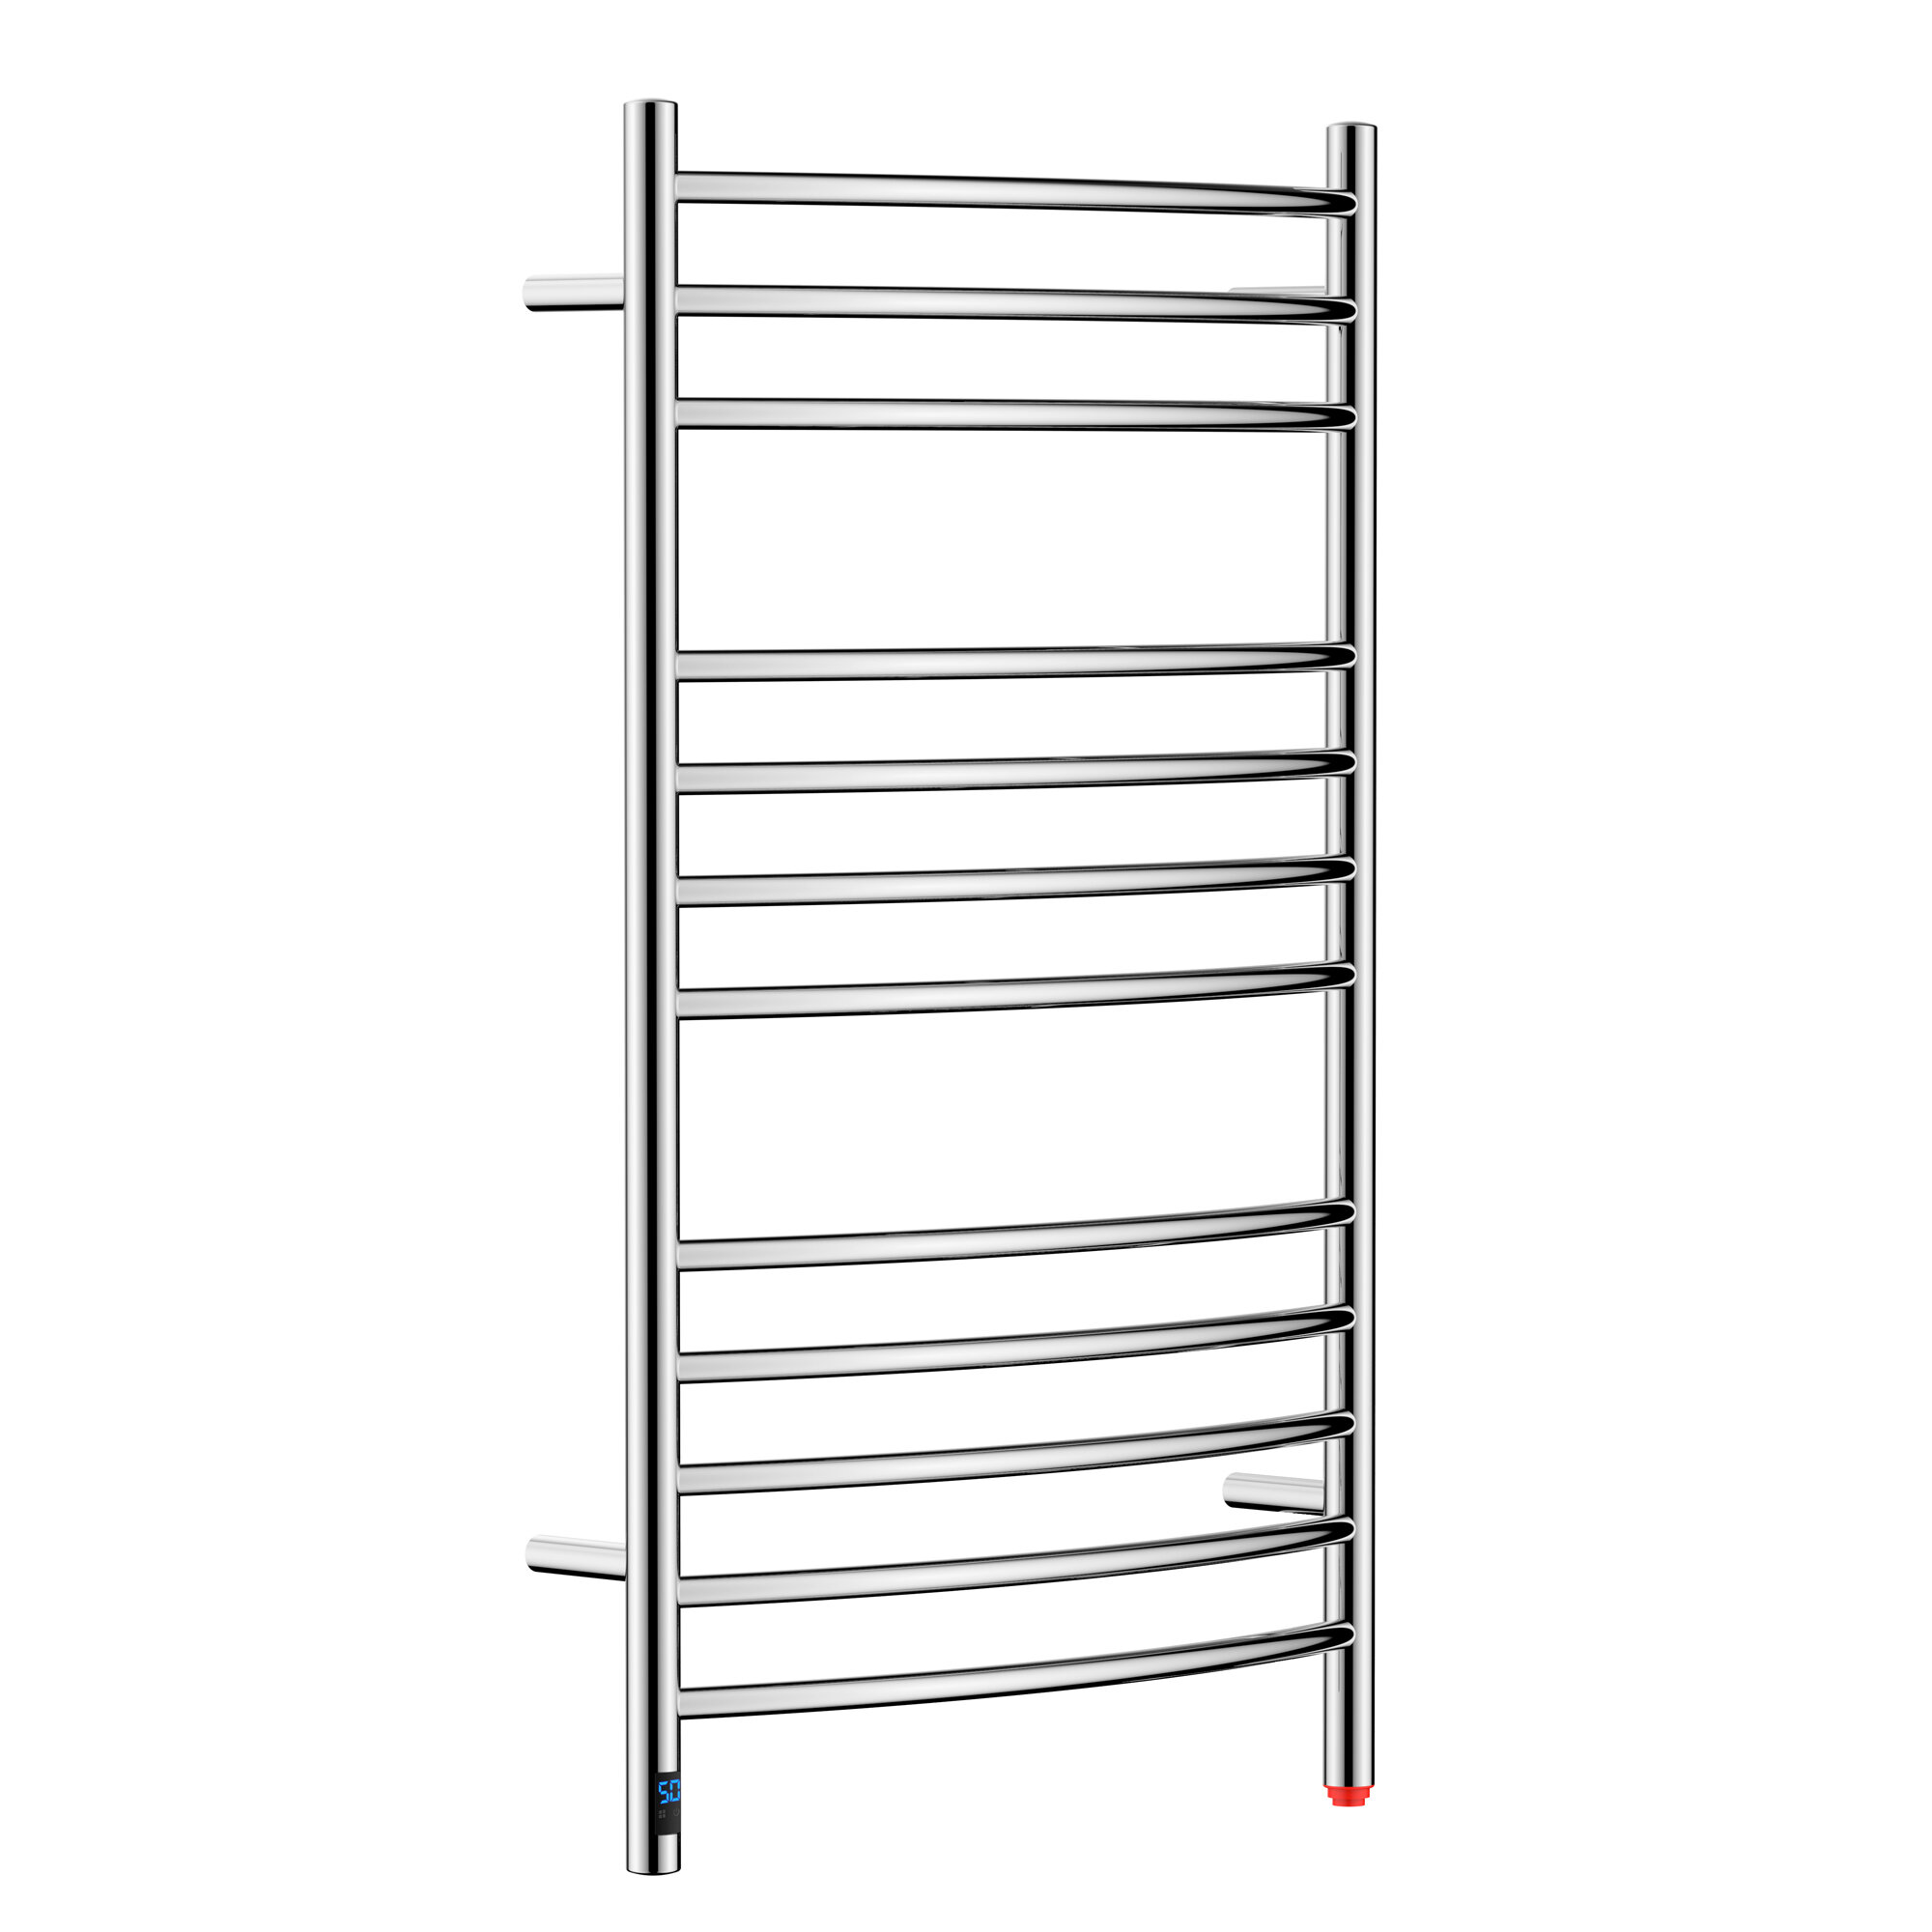 Chester Electric Stainless Steel Towel Rail Bathroom Heater Heated Towel Rail Mirror Polished Finish 